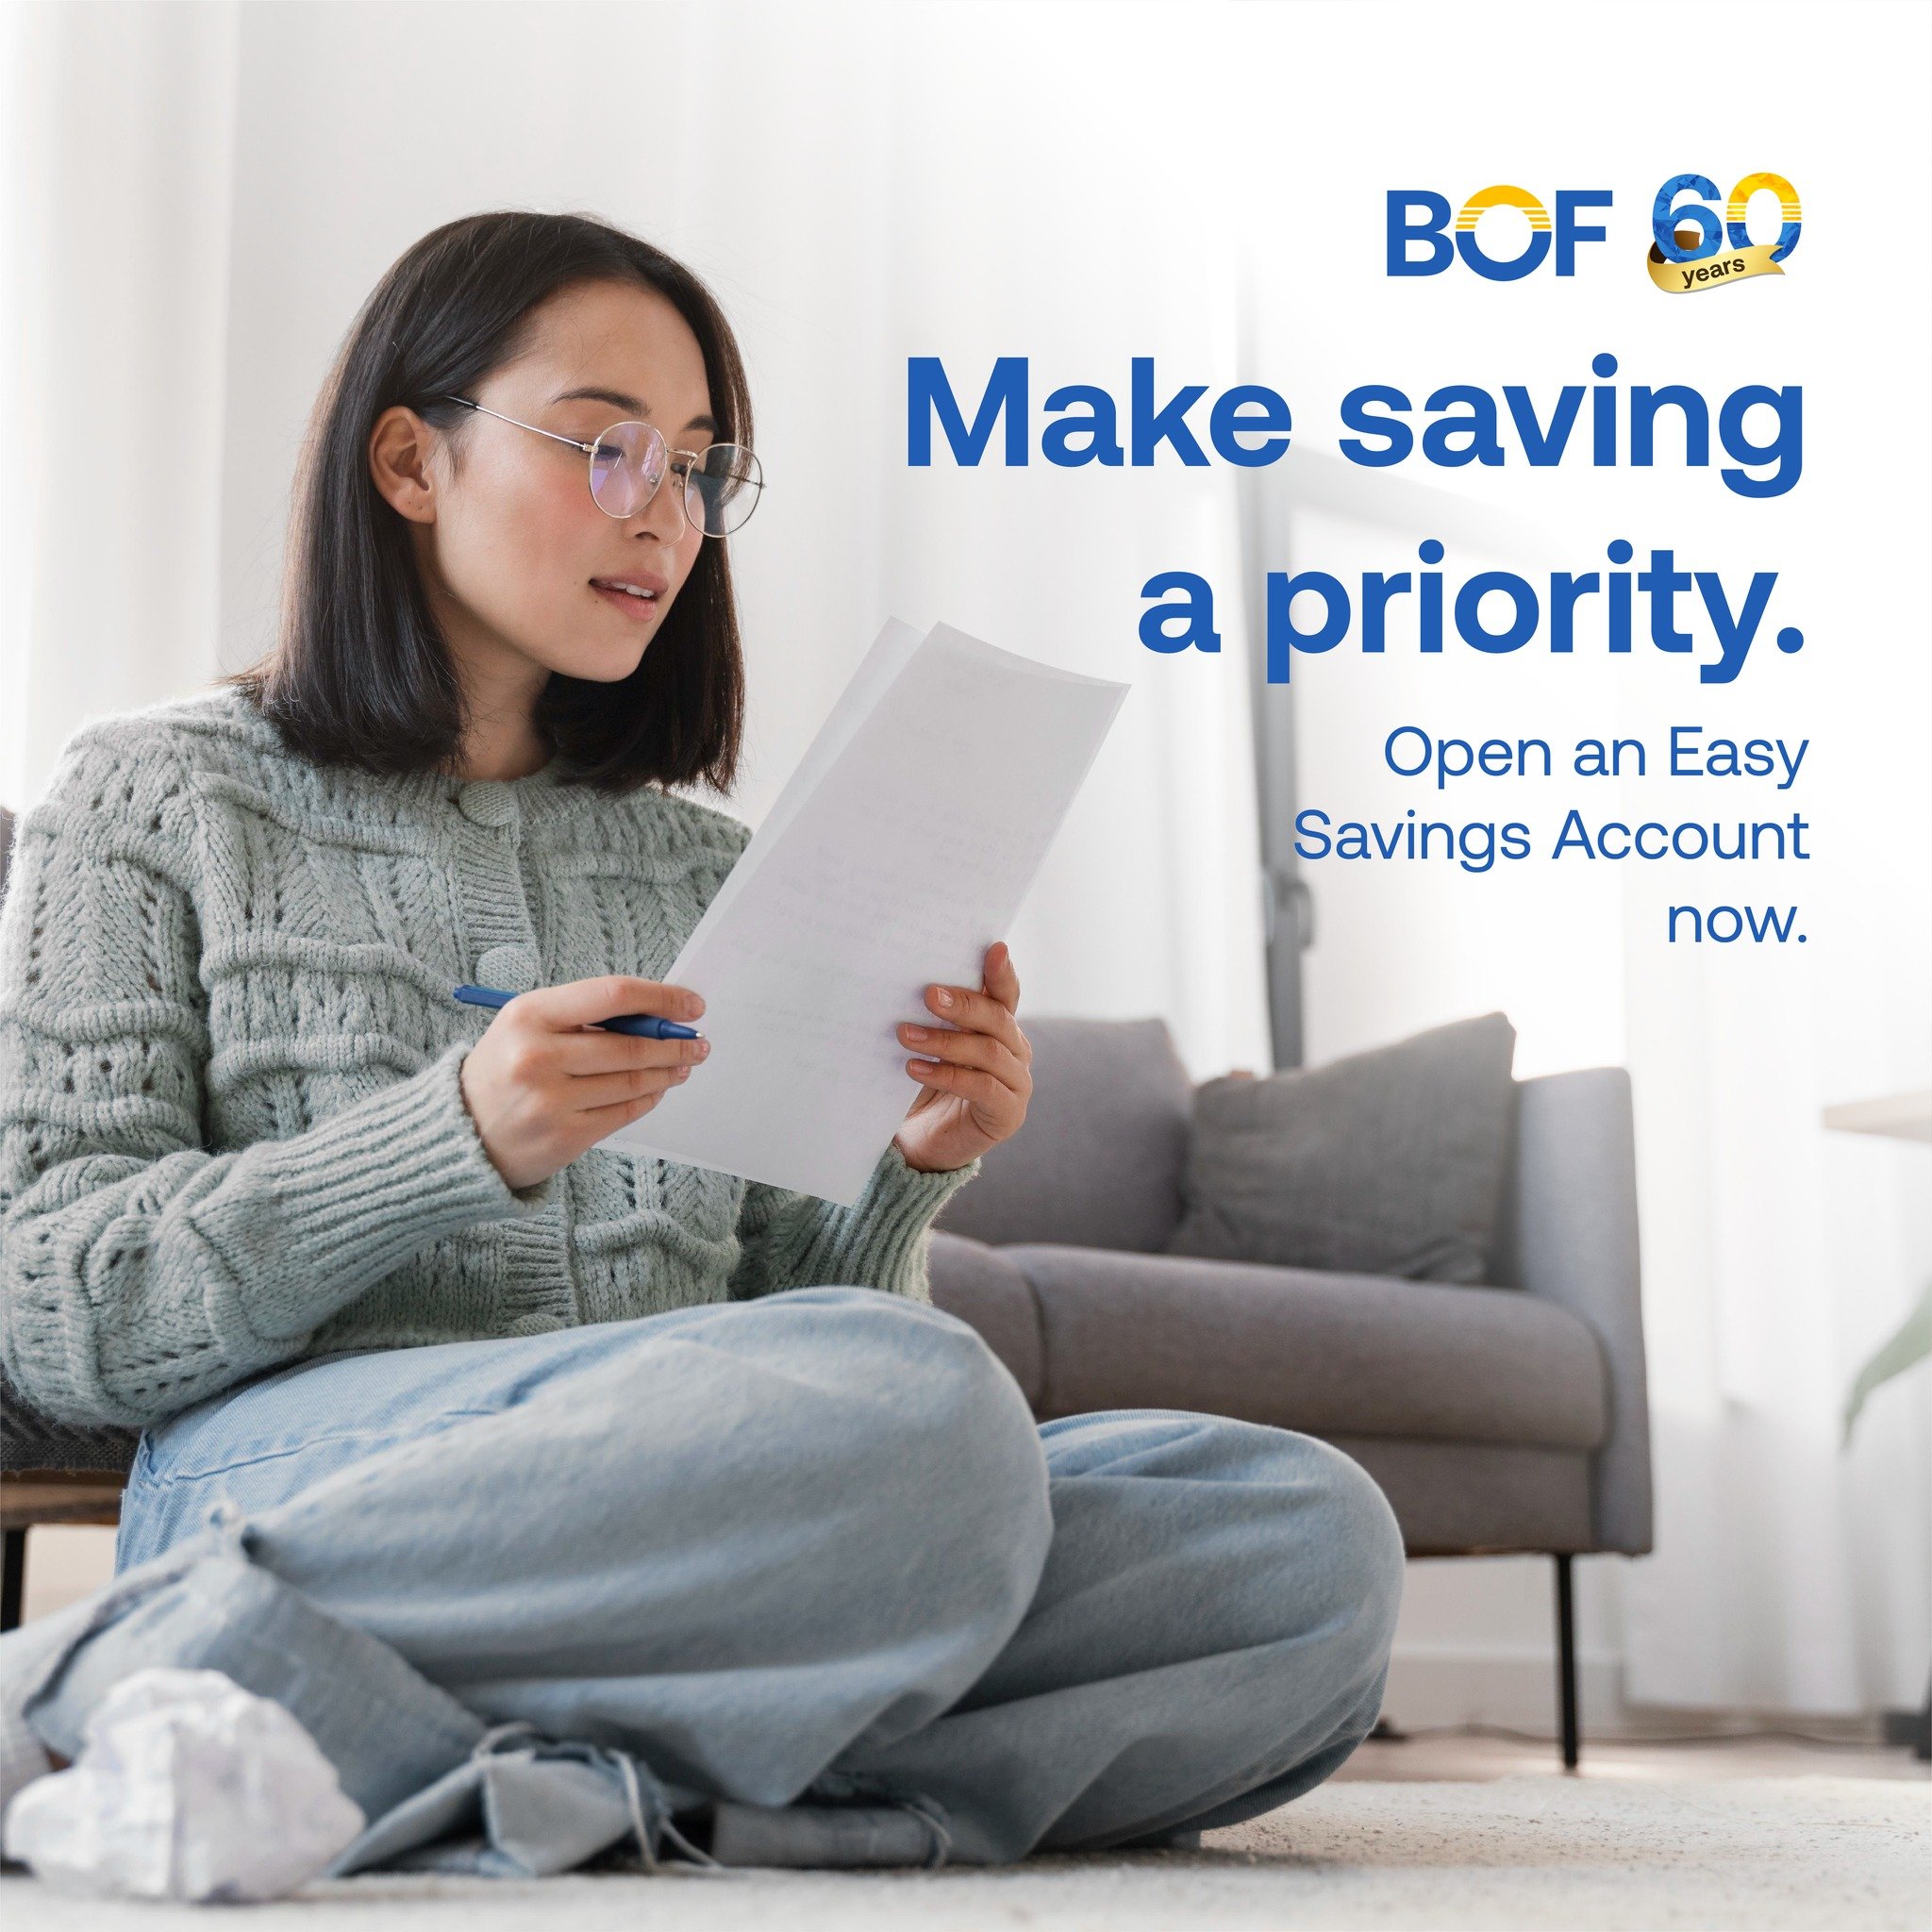 Prioritize your financial well-being starting today! Open a Basic Savings Account now and take the first step towards securing your future.

https://www.bof.com.ph/passbook-accounts

#BOF

BOF, Inc. (A Rural Bank) is regulated by the Bangko Sentral n